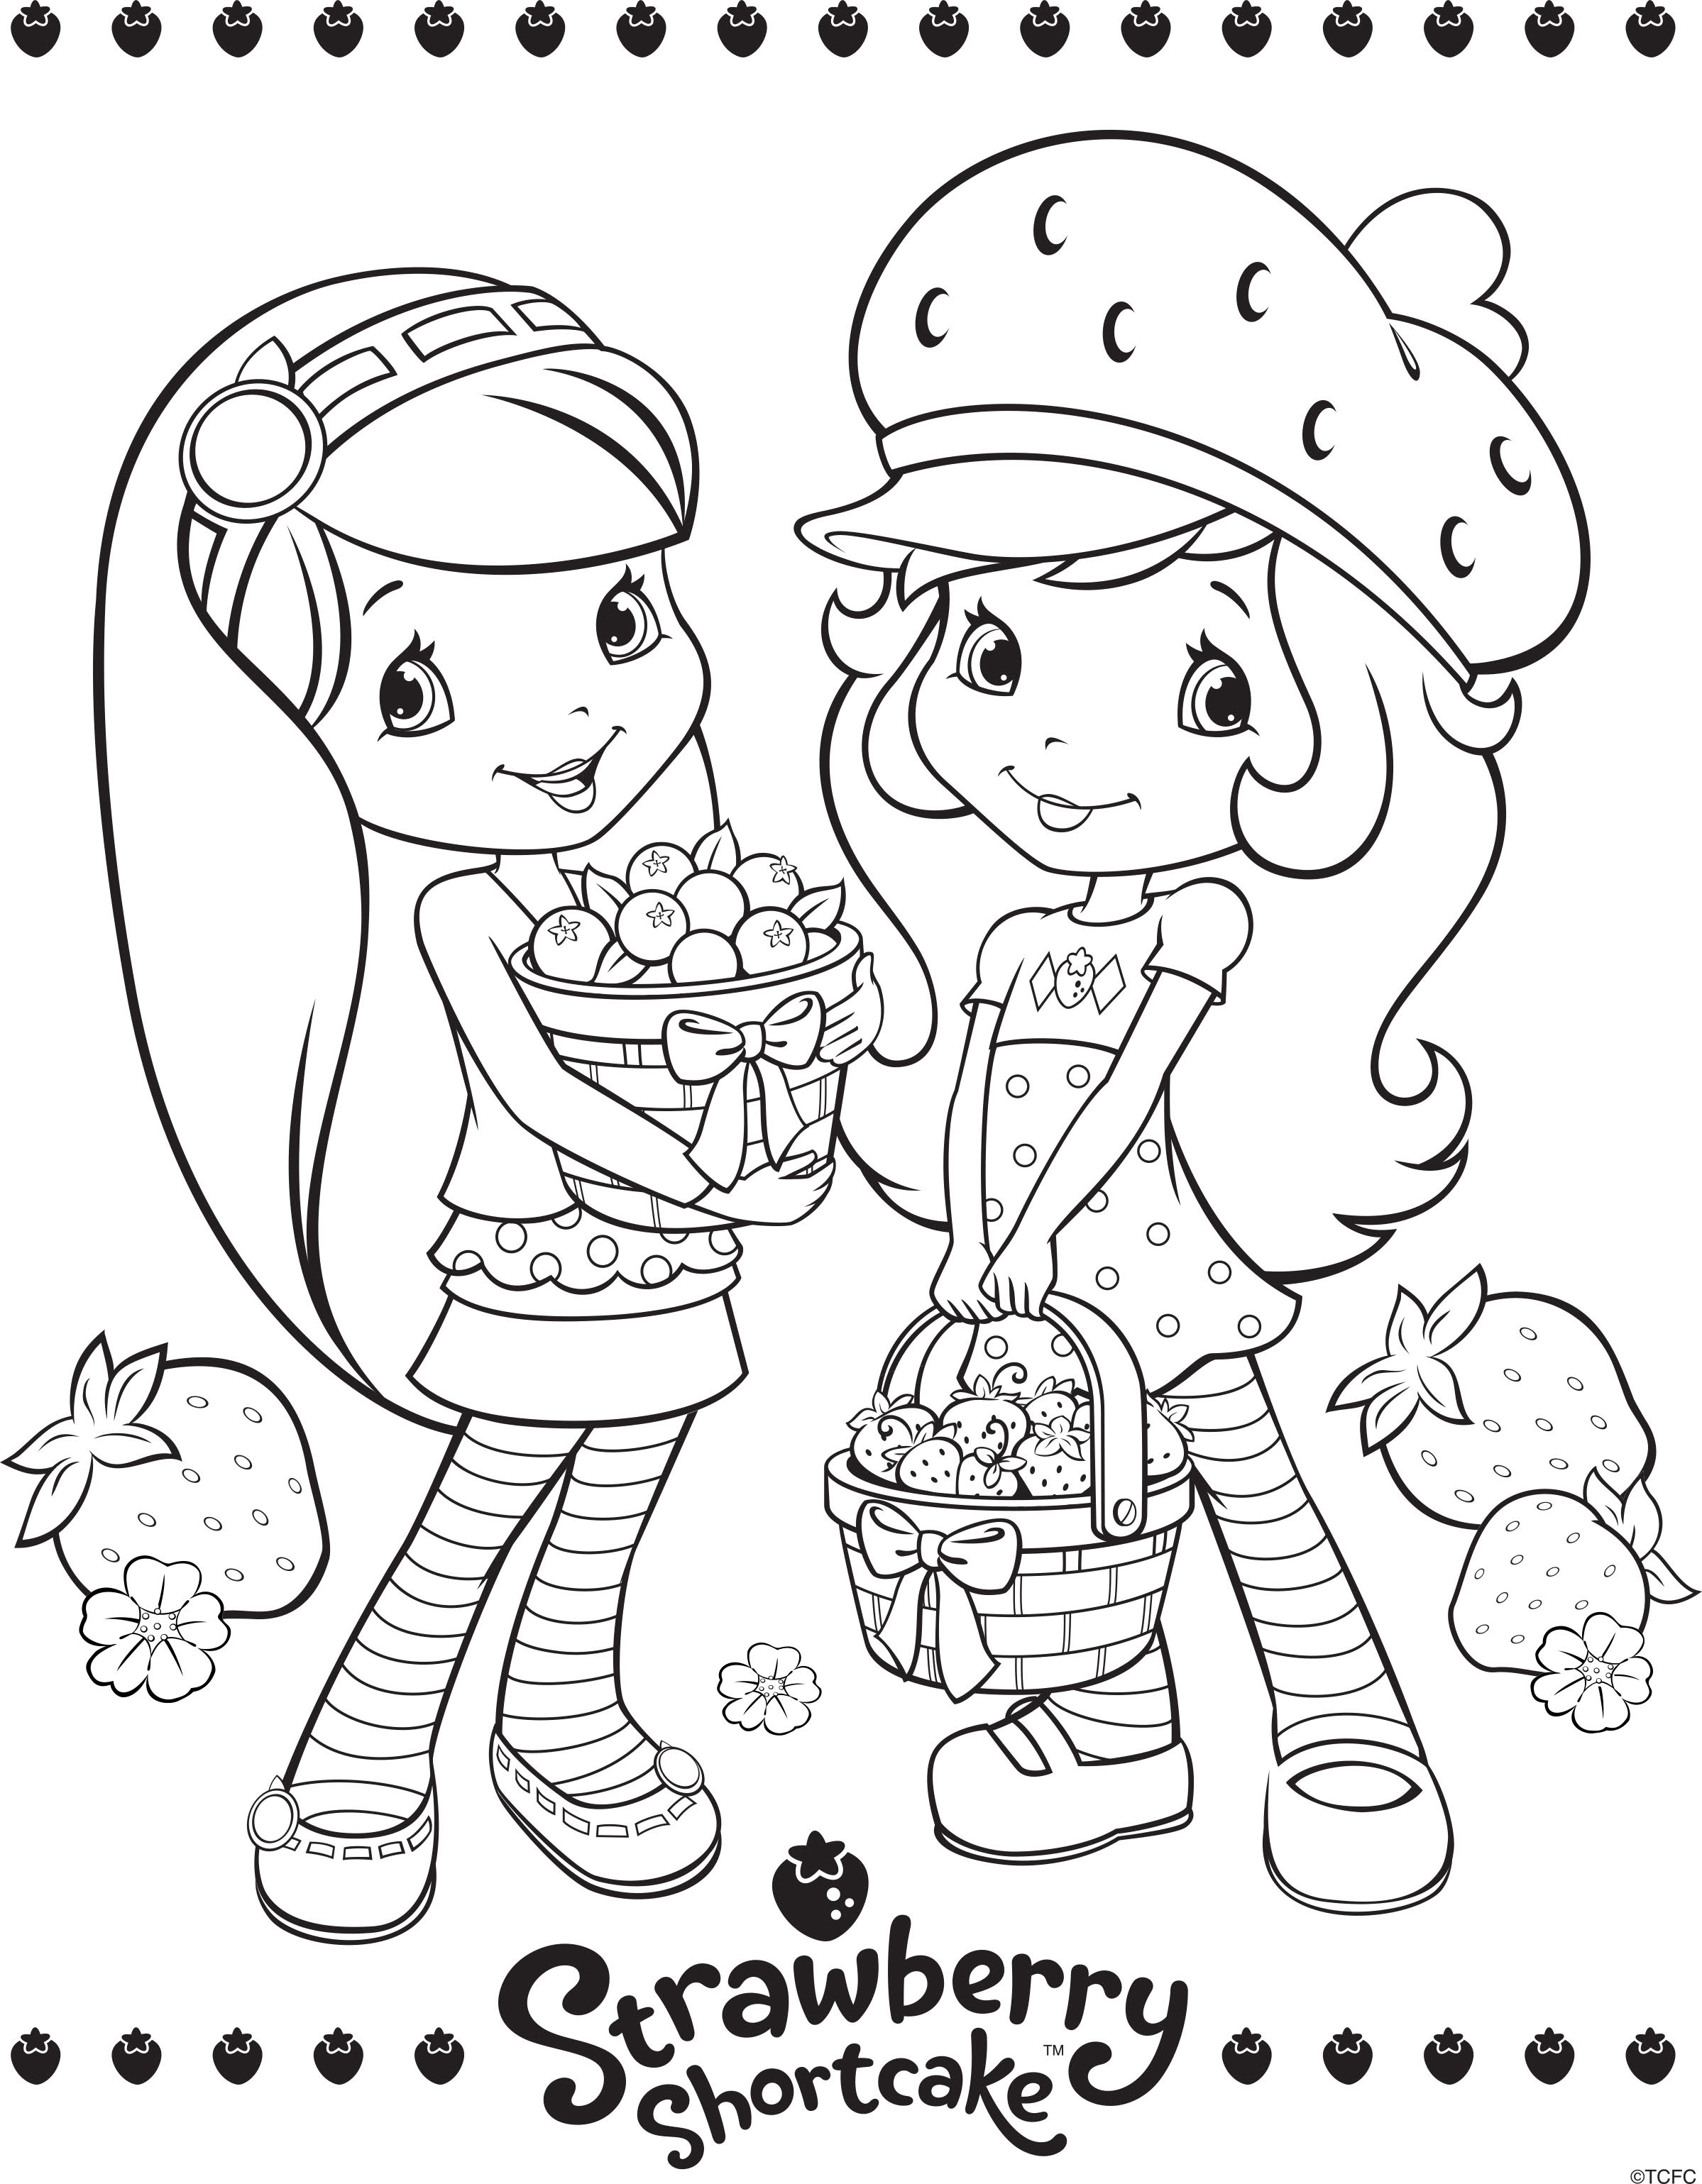 Strawberry shortcake berrykins coloring pages download and